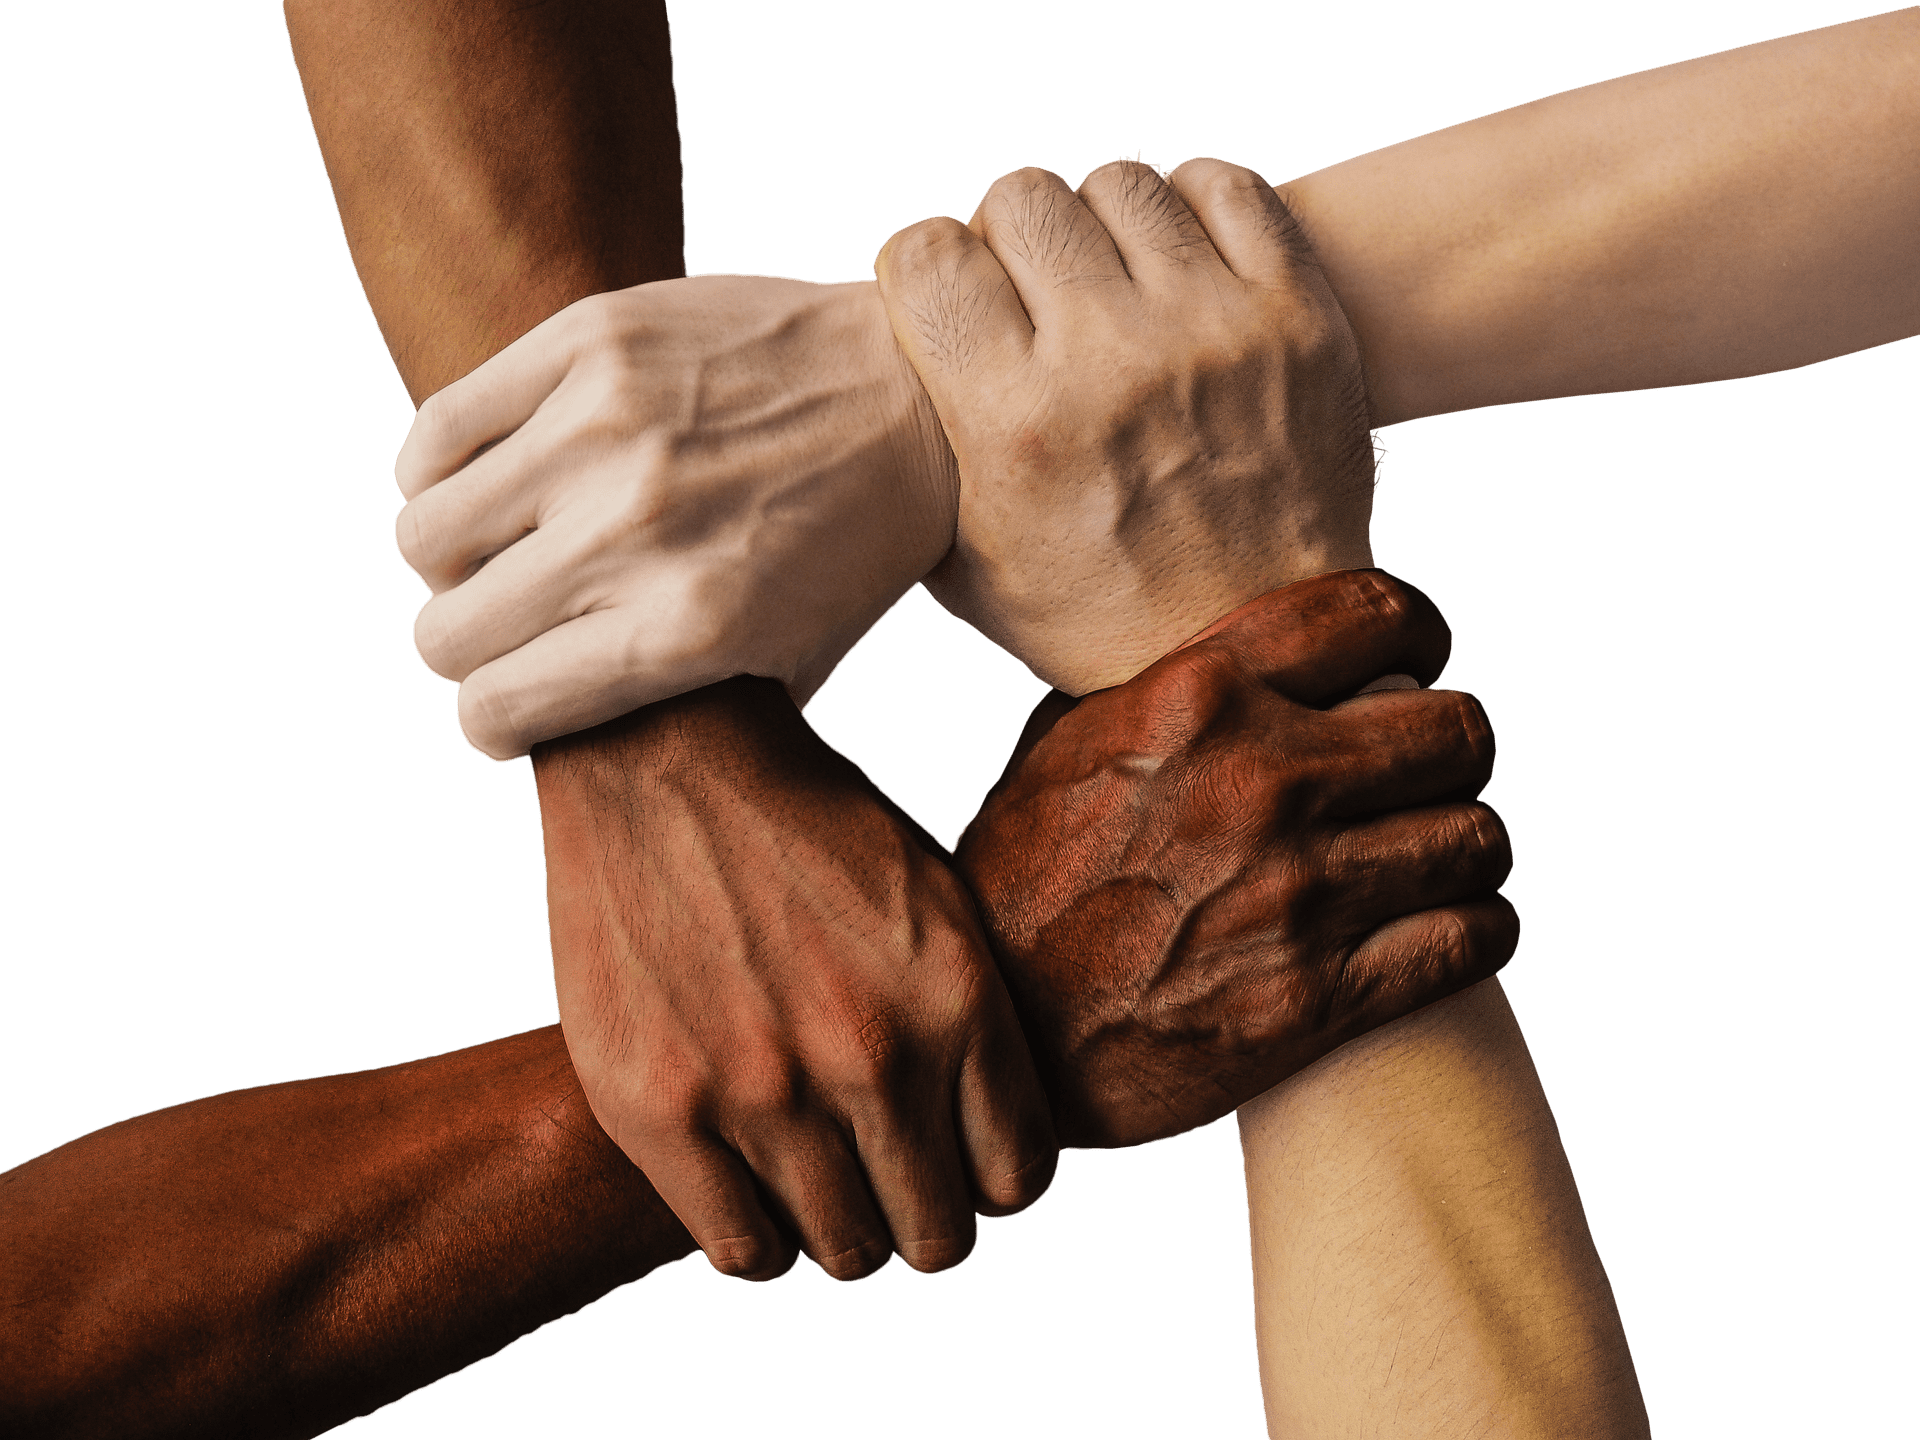 Hands in different skin colors holding on to each others wrist to shape a square.